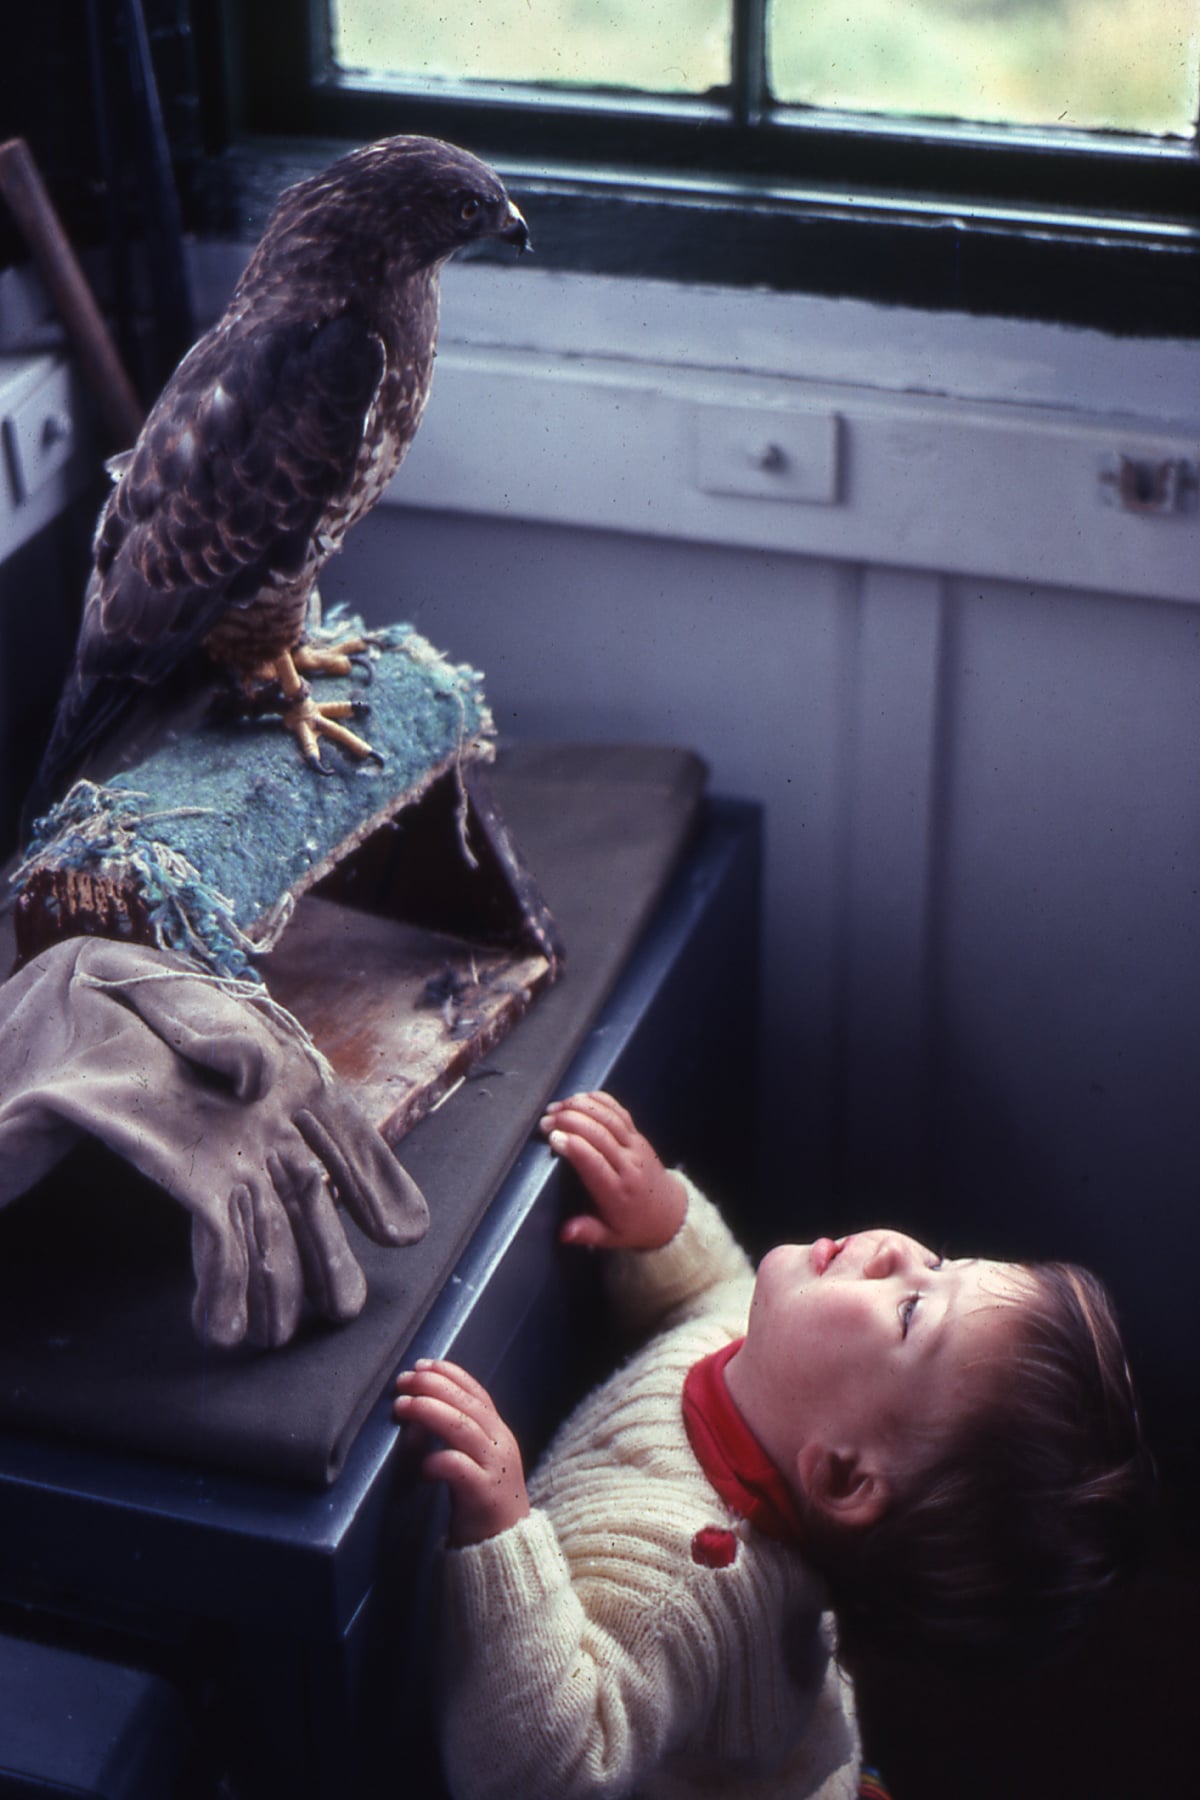 A young visitor to the Harris Center in the 1980s.